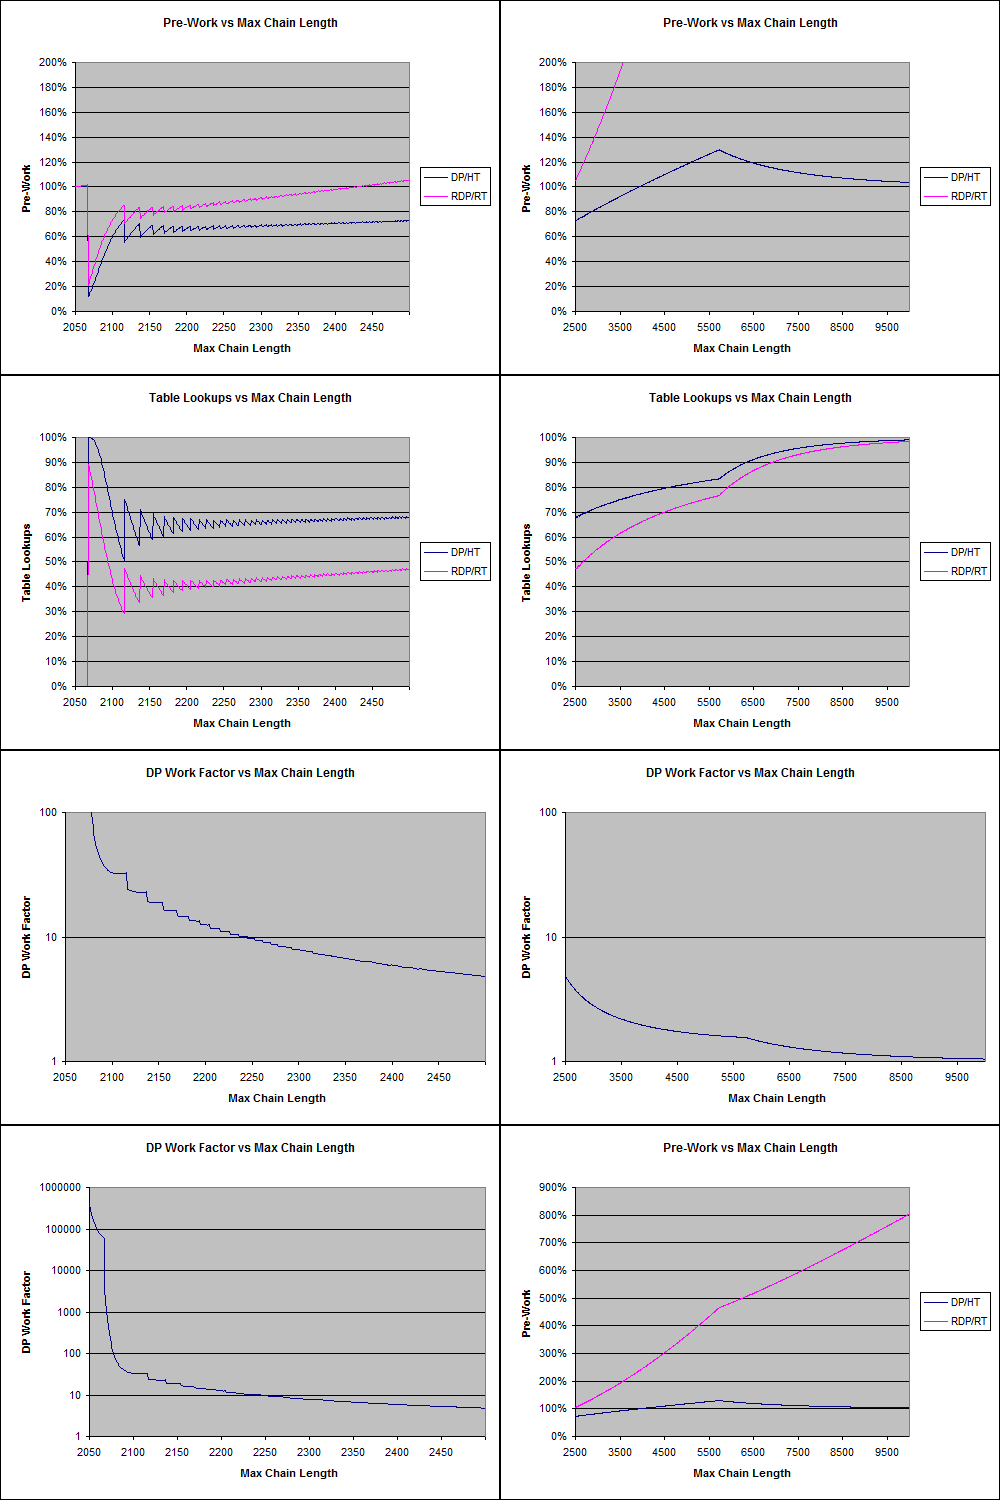 Charts of Pre-Work vs Max Chain Length, Table Lookups vs Max Chain Length, DP Work Factor vs Max Chain Length